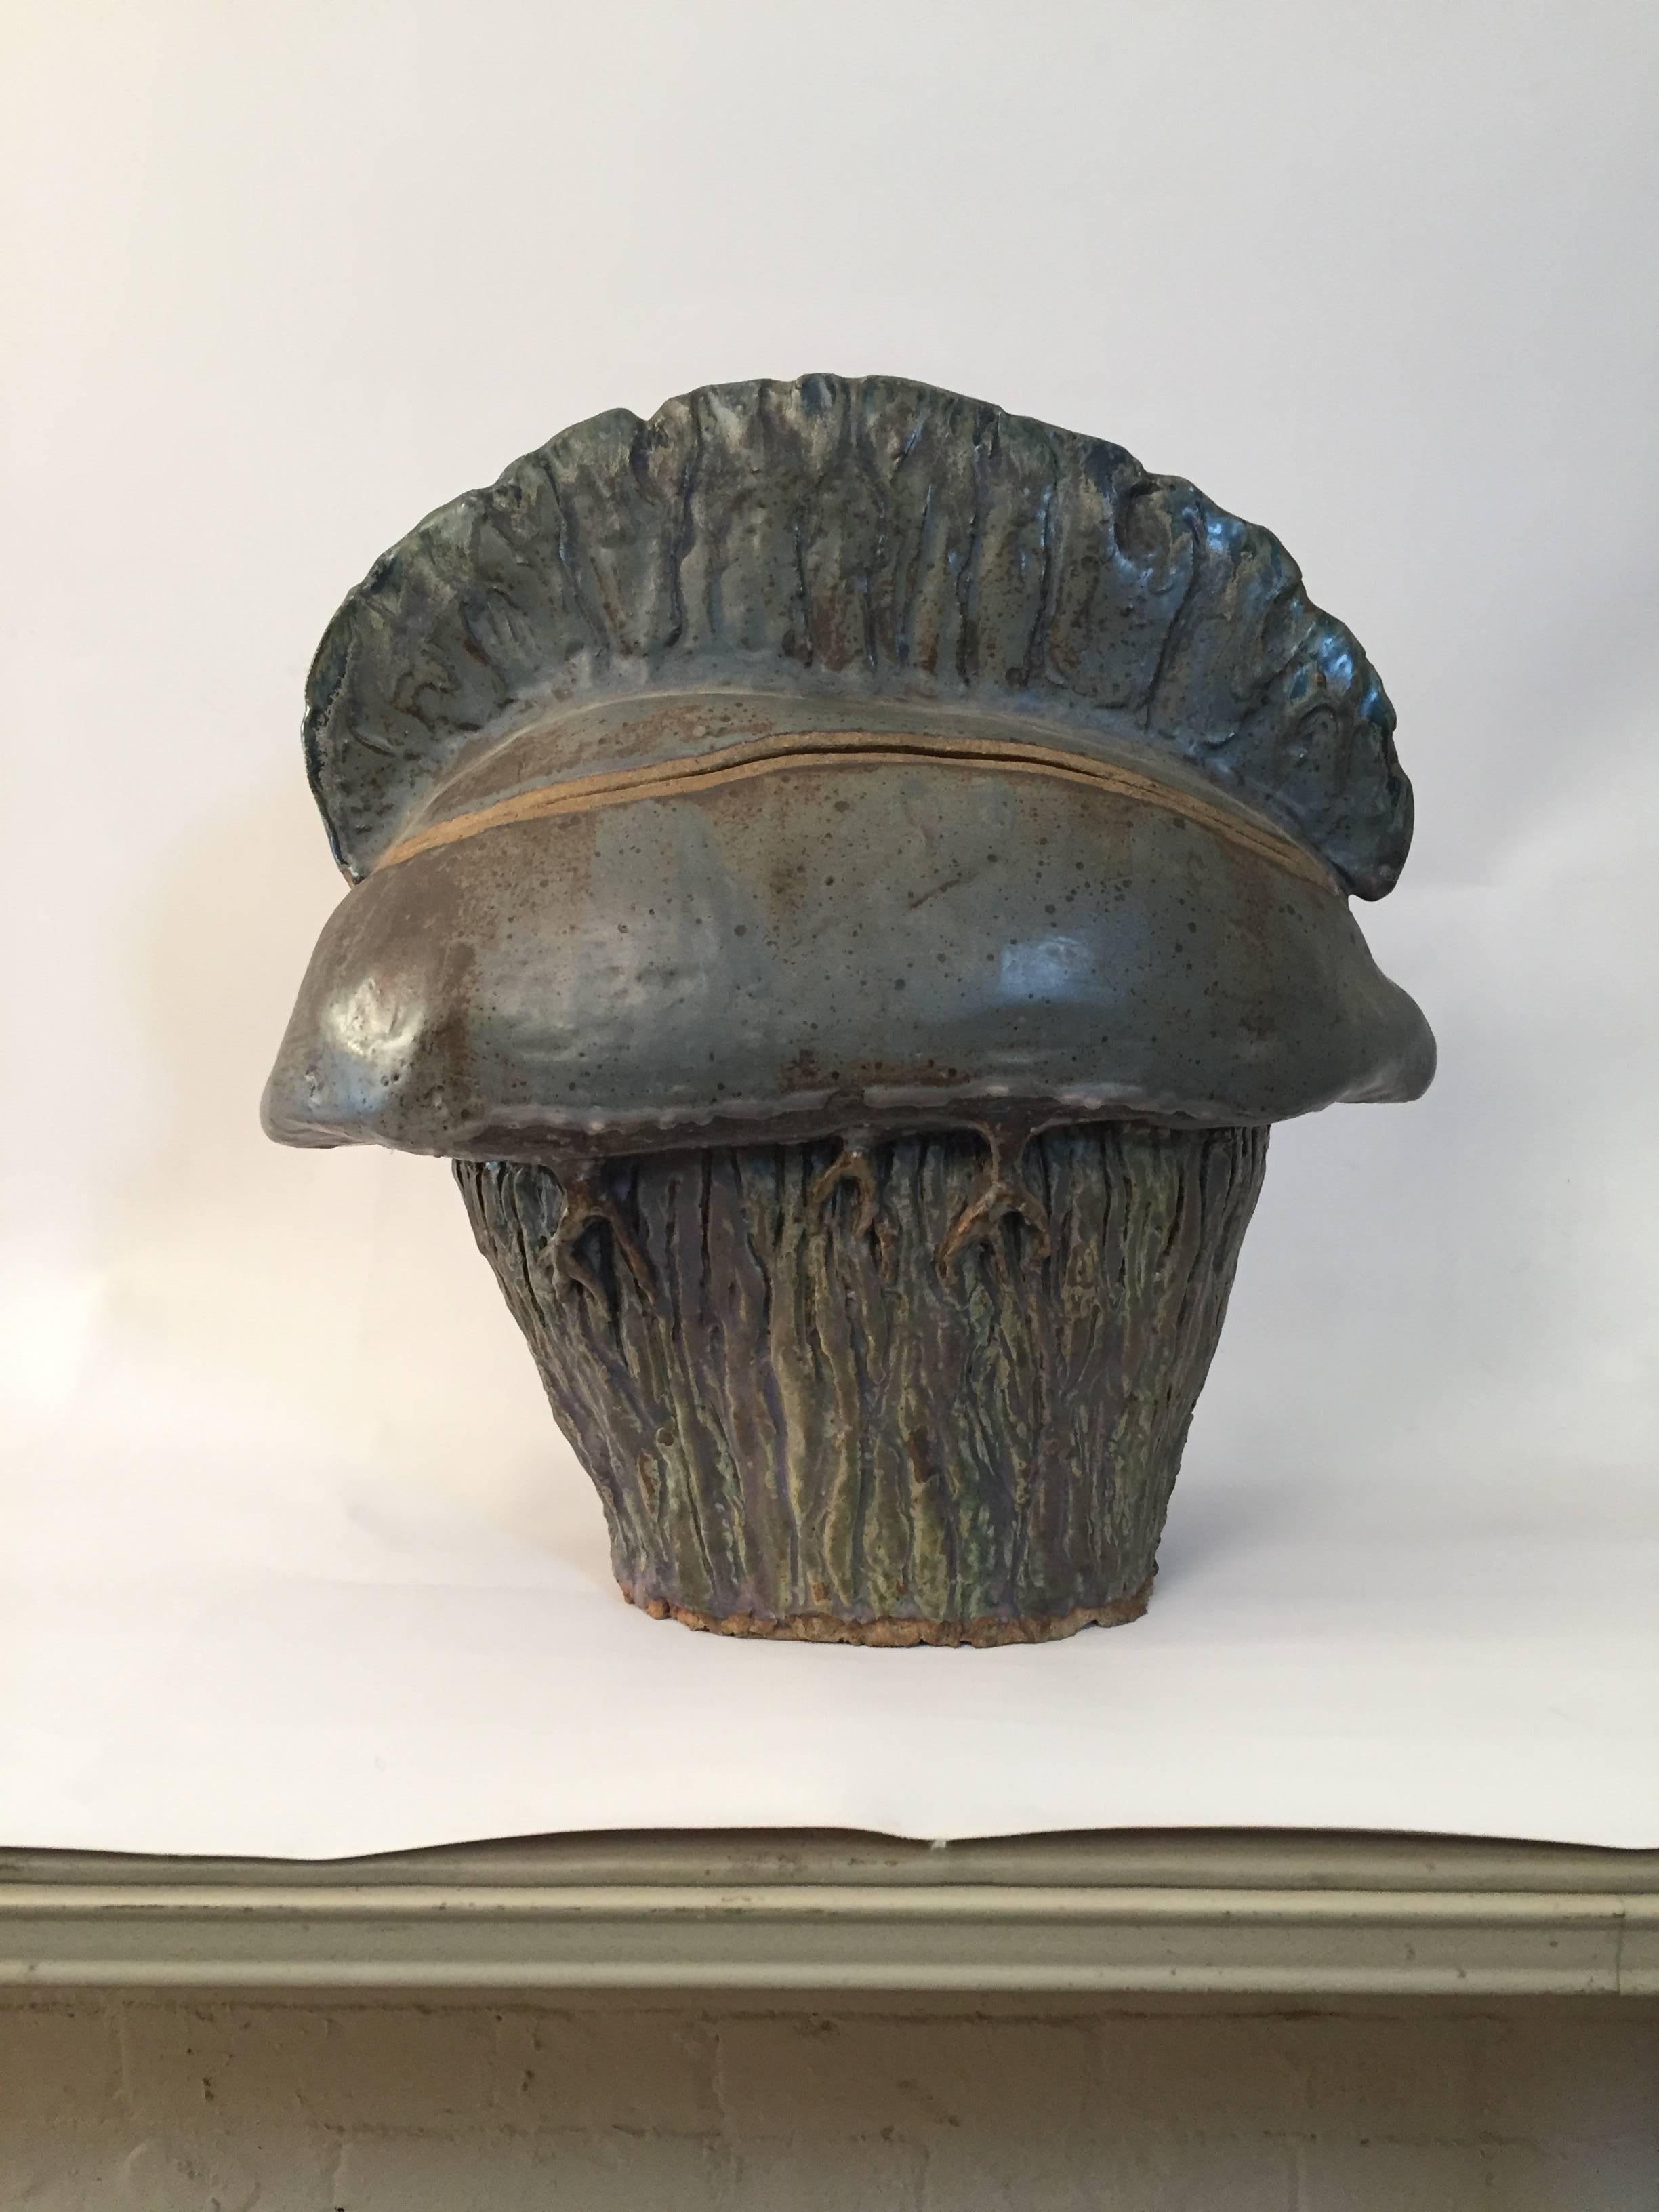 Executed by RISD potter, Laura Stanczyk, circa 1967-69. Heavy, thick walled slab constructed pottery vessel representing the venomous giant siphonophore, the Man O' War or Physalia physalis. Glazed in blue, brown and gray. Unsigned and purchased